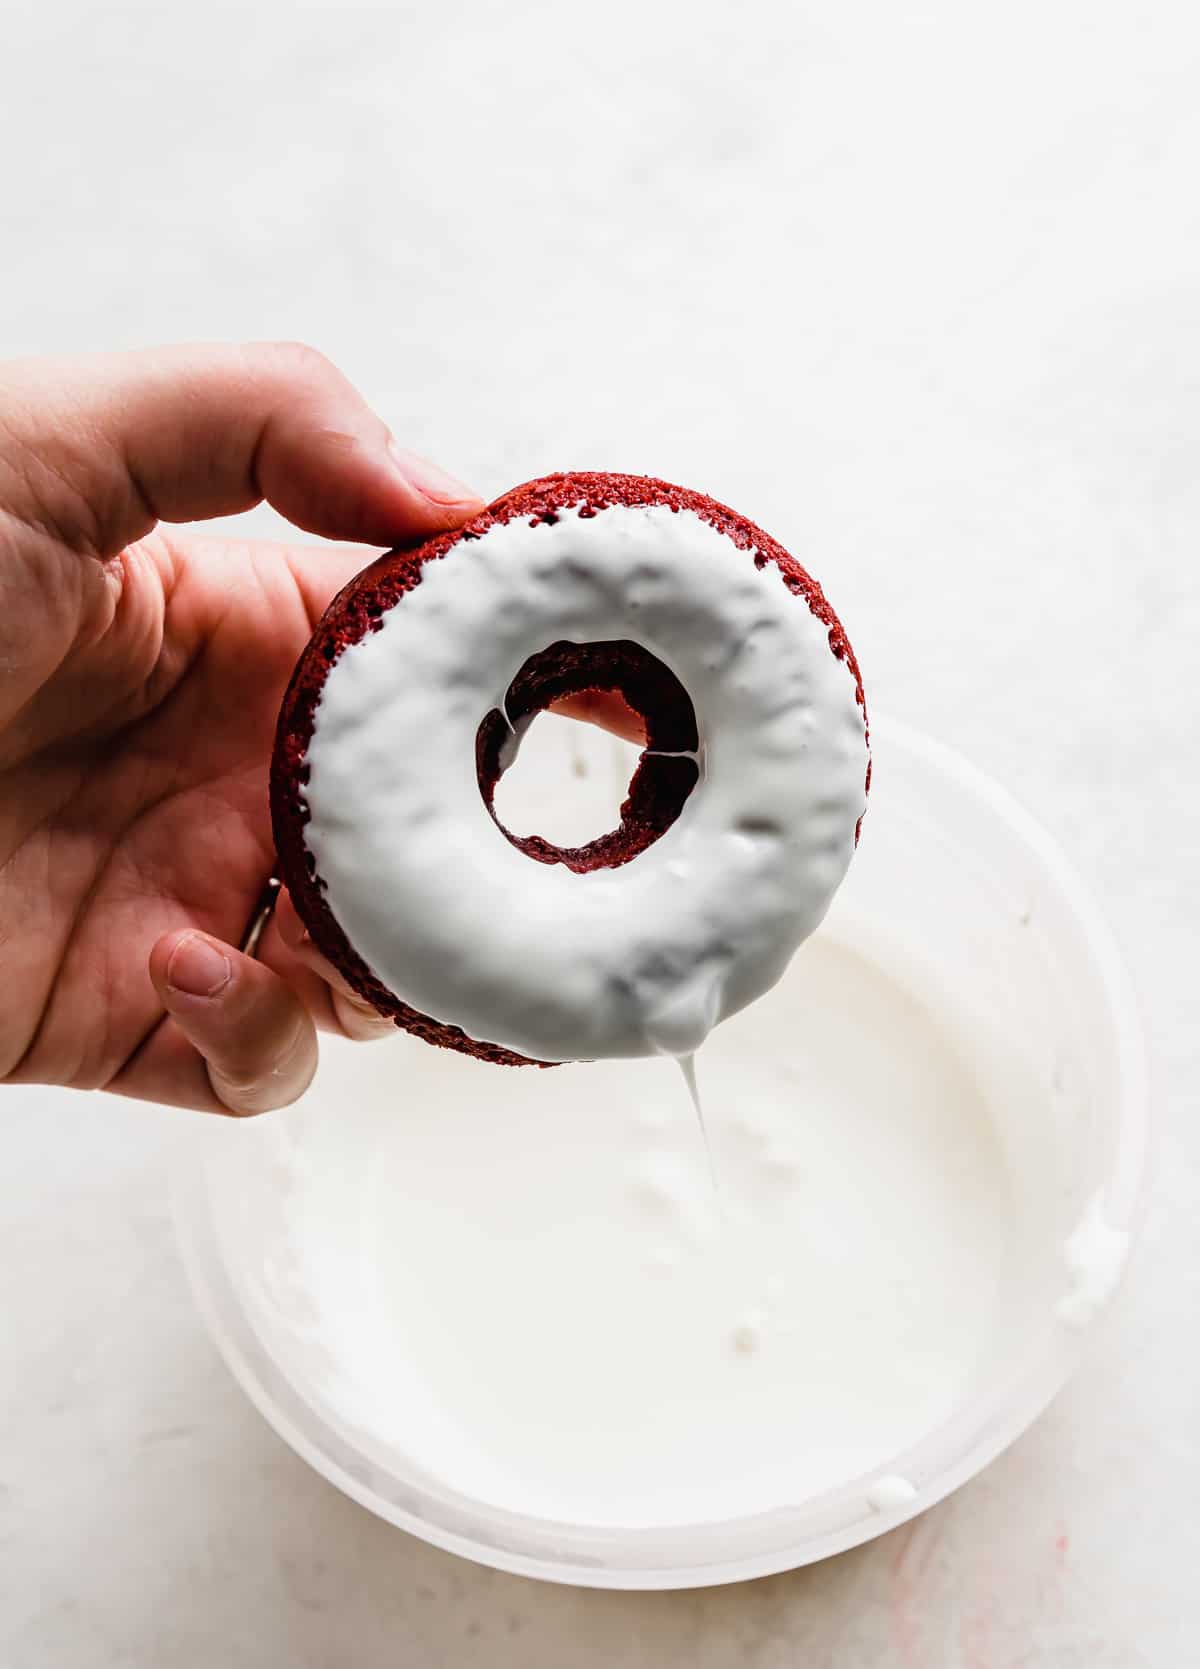 A baked Red Velvet Donut dipped in a white chocolate glaze.